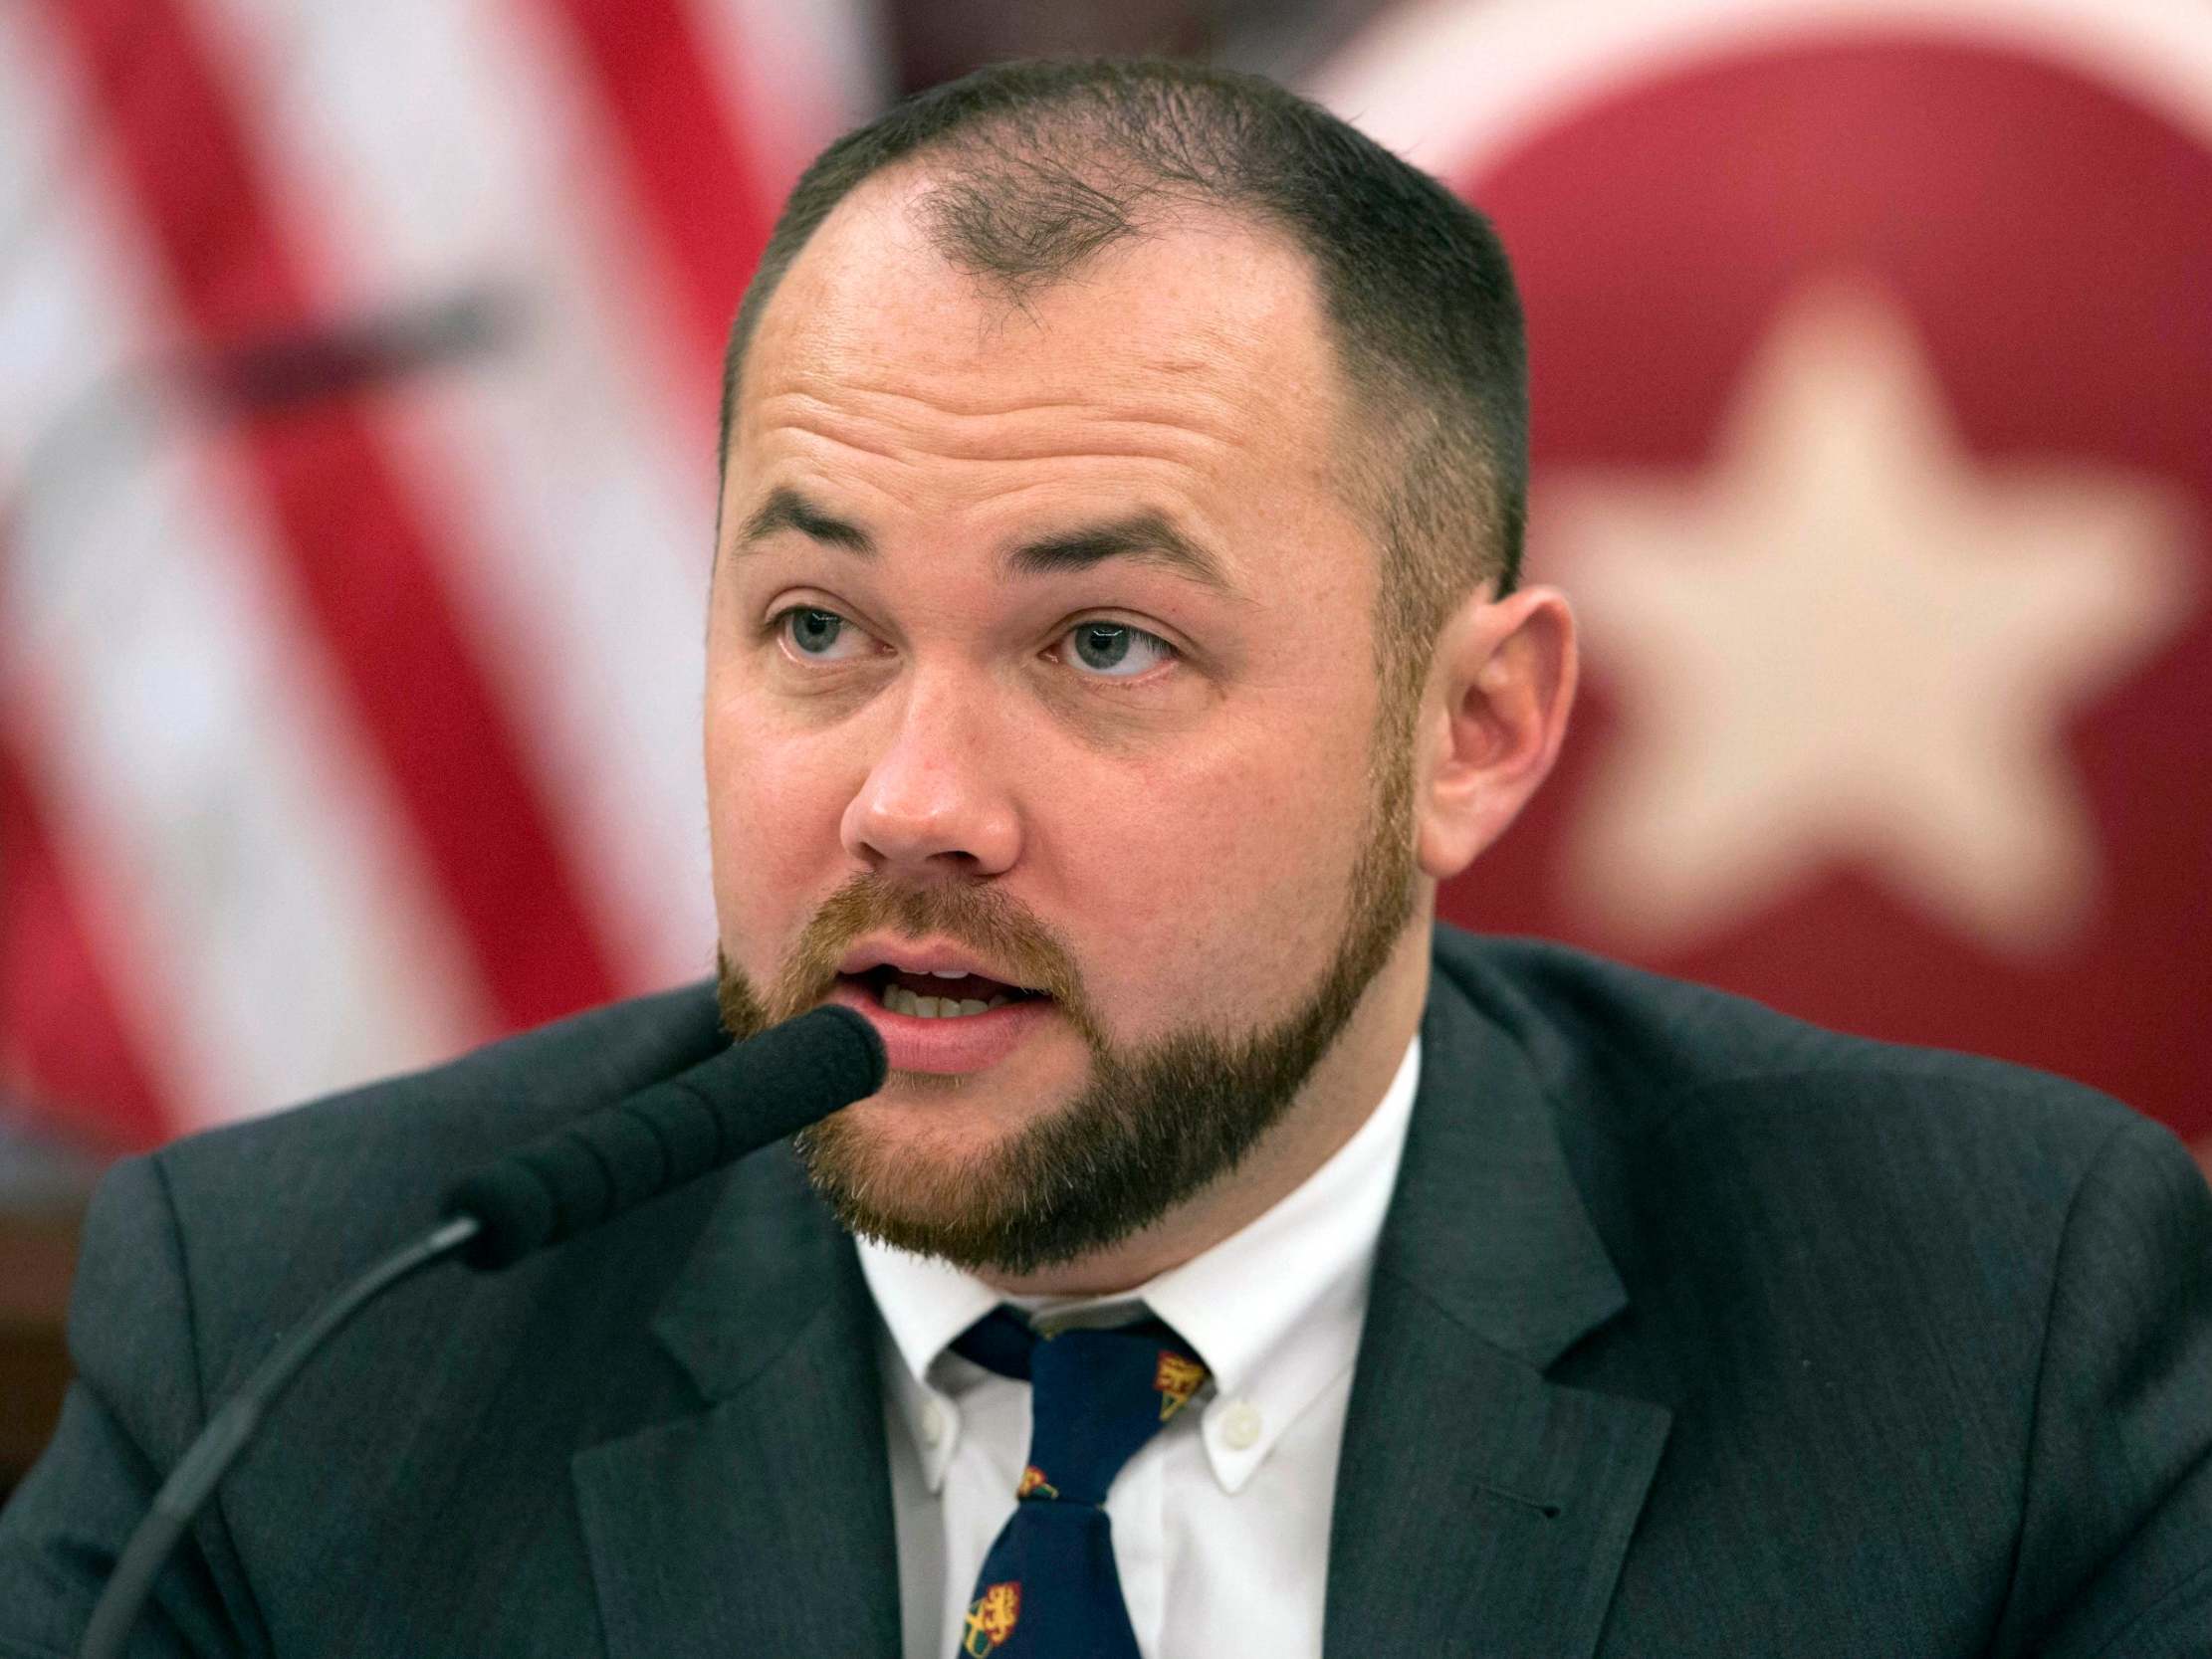 New York city council speaker Corey Johnson, who is gay, said he is reluctantly repealing the ban